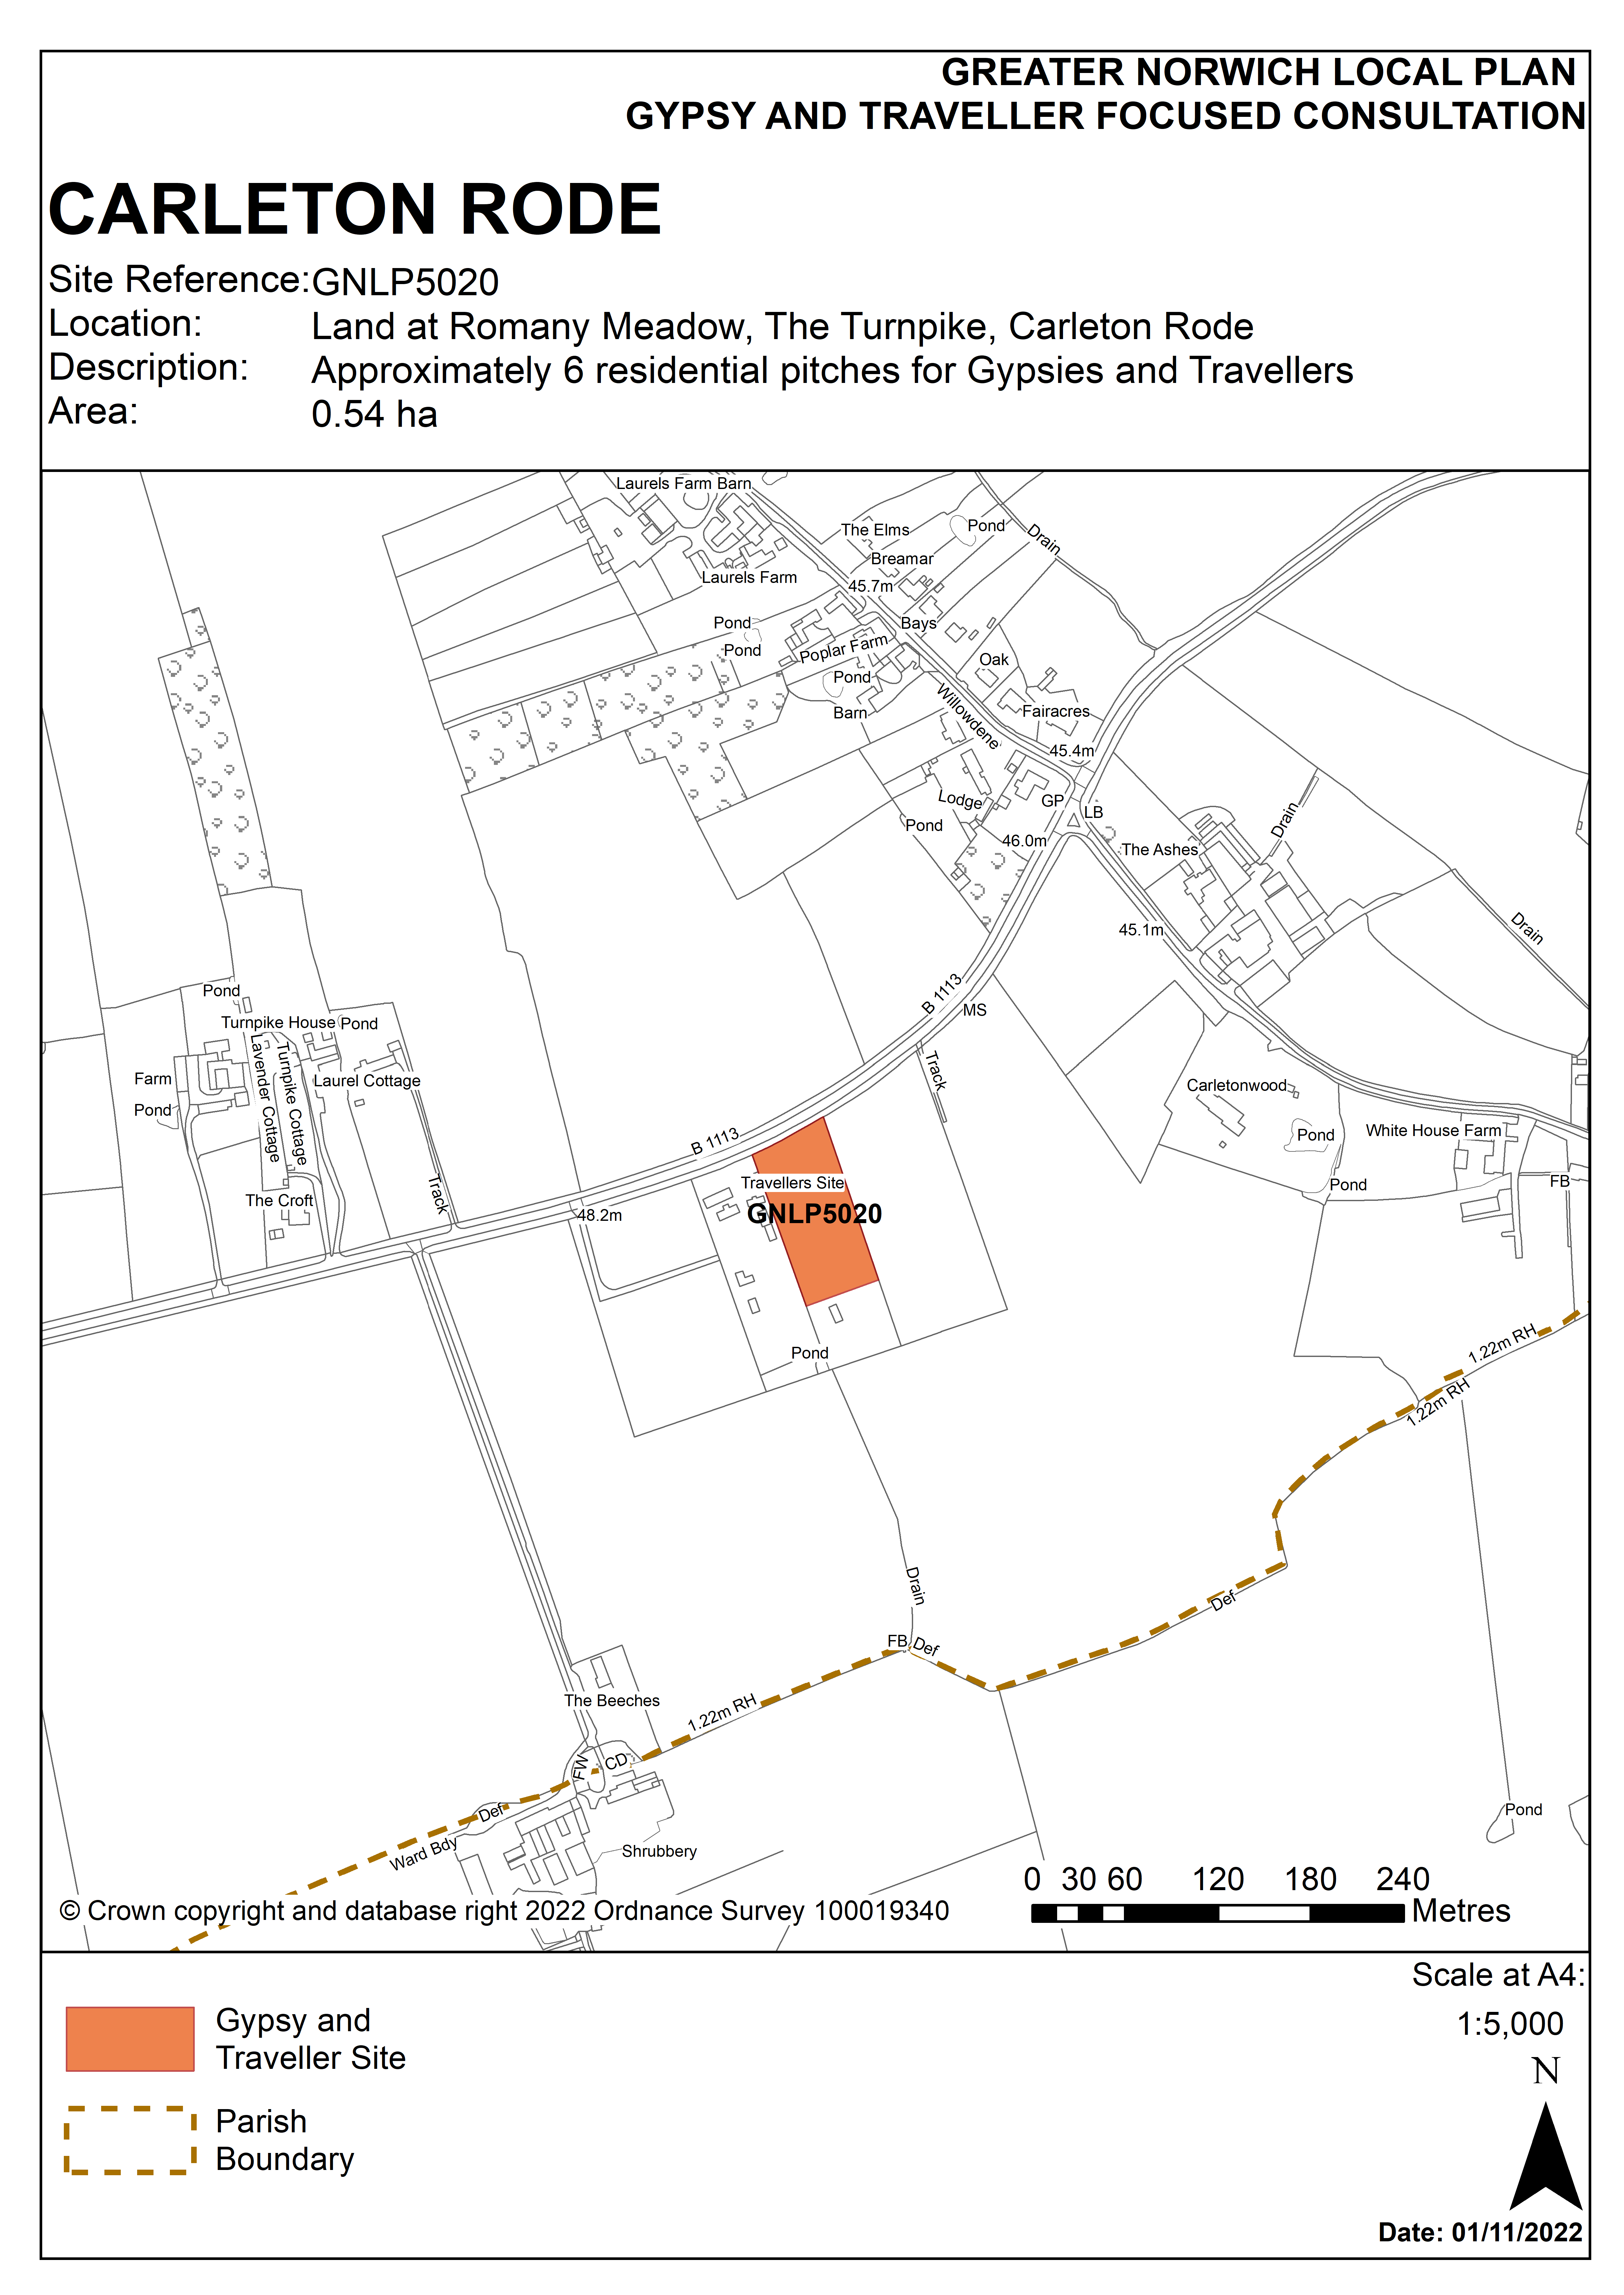 Map showing proposed Gypsy and Traveller site at Romany Meadow, The Turnpike, Carleton Rode